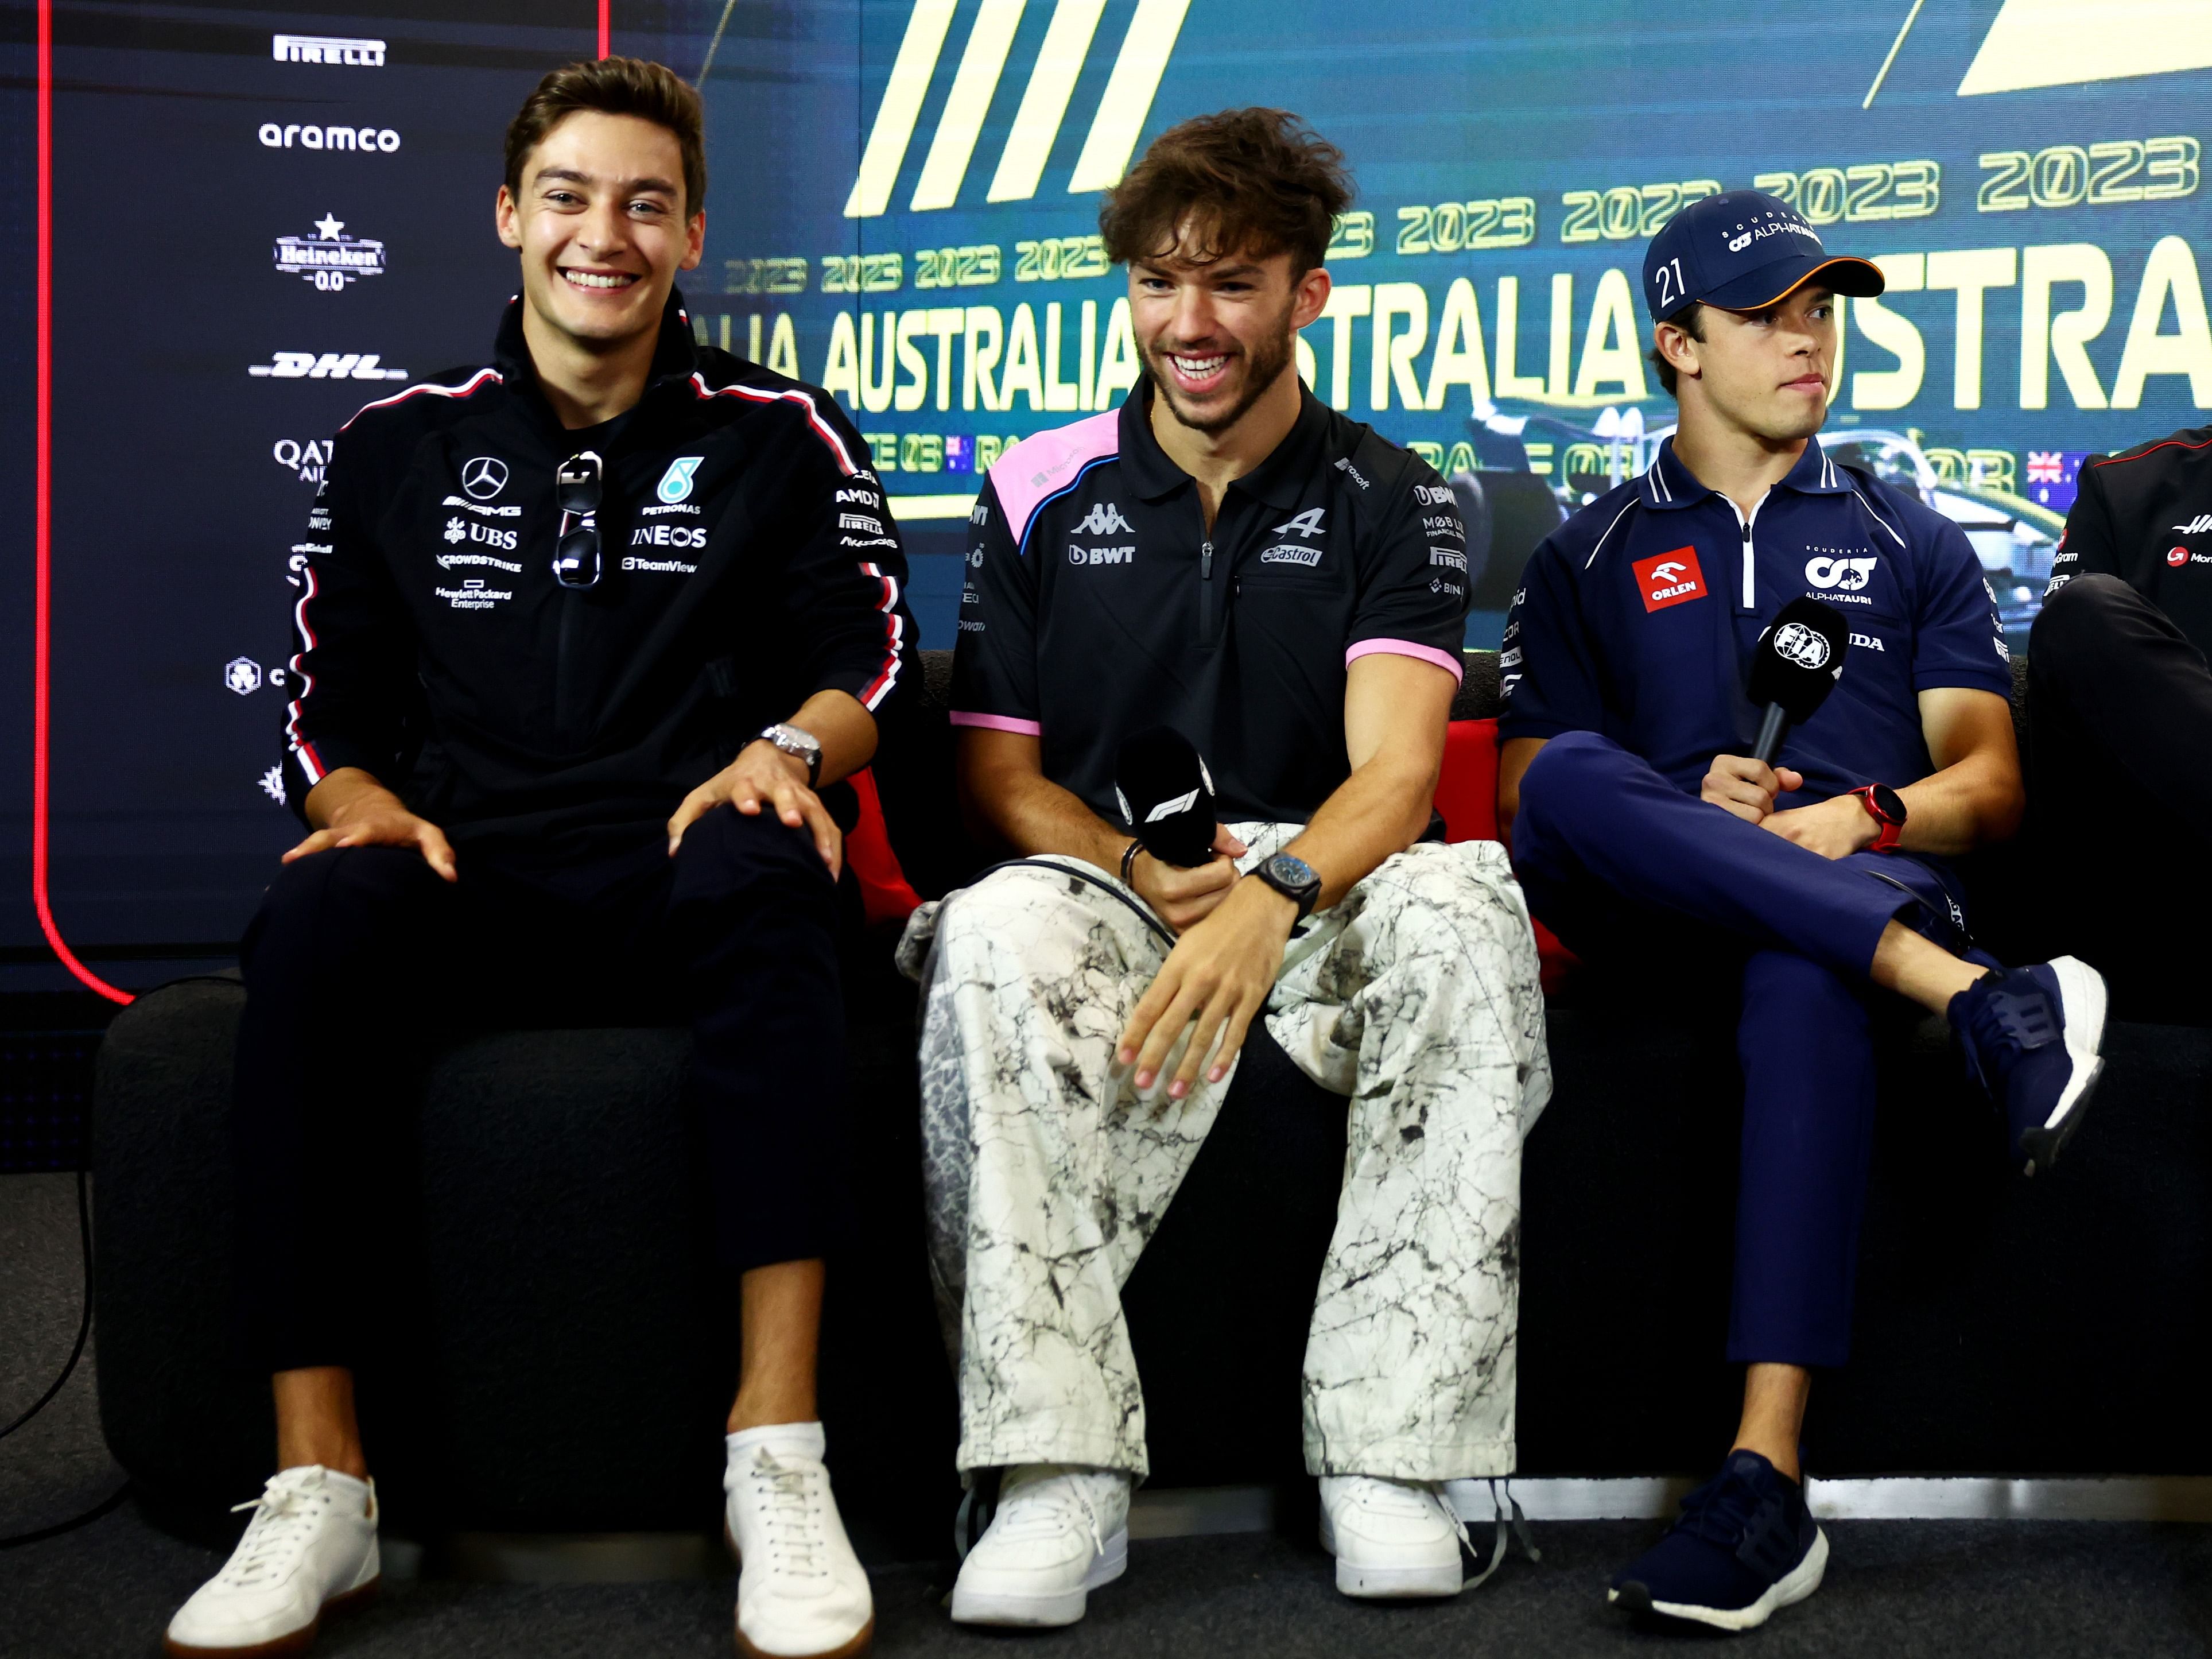 George Russell, Pierre Gasly, and Nyck de Vries attend the Drivers Press Conference during previews ahead of the 2023 F1 Australian Grand Prix. (Photo by Dan Istitene/Getty Images)